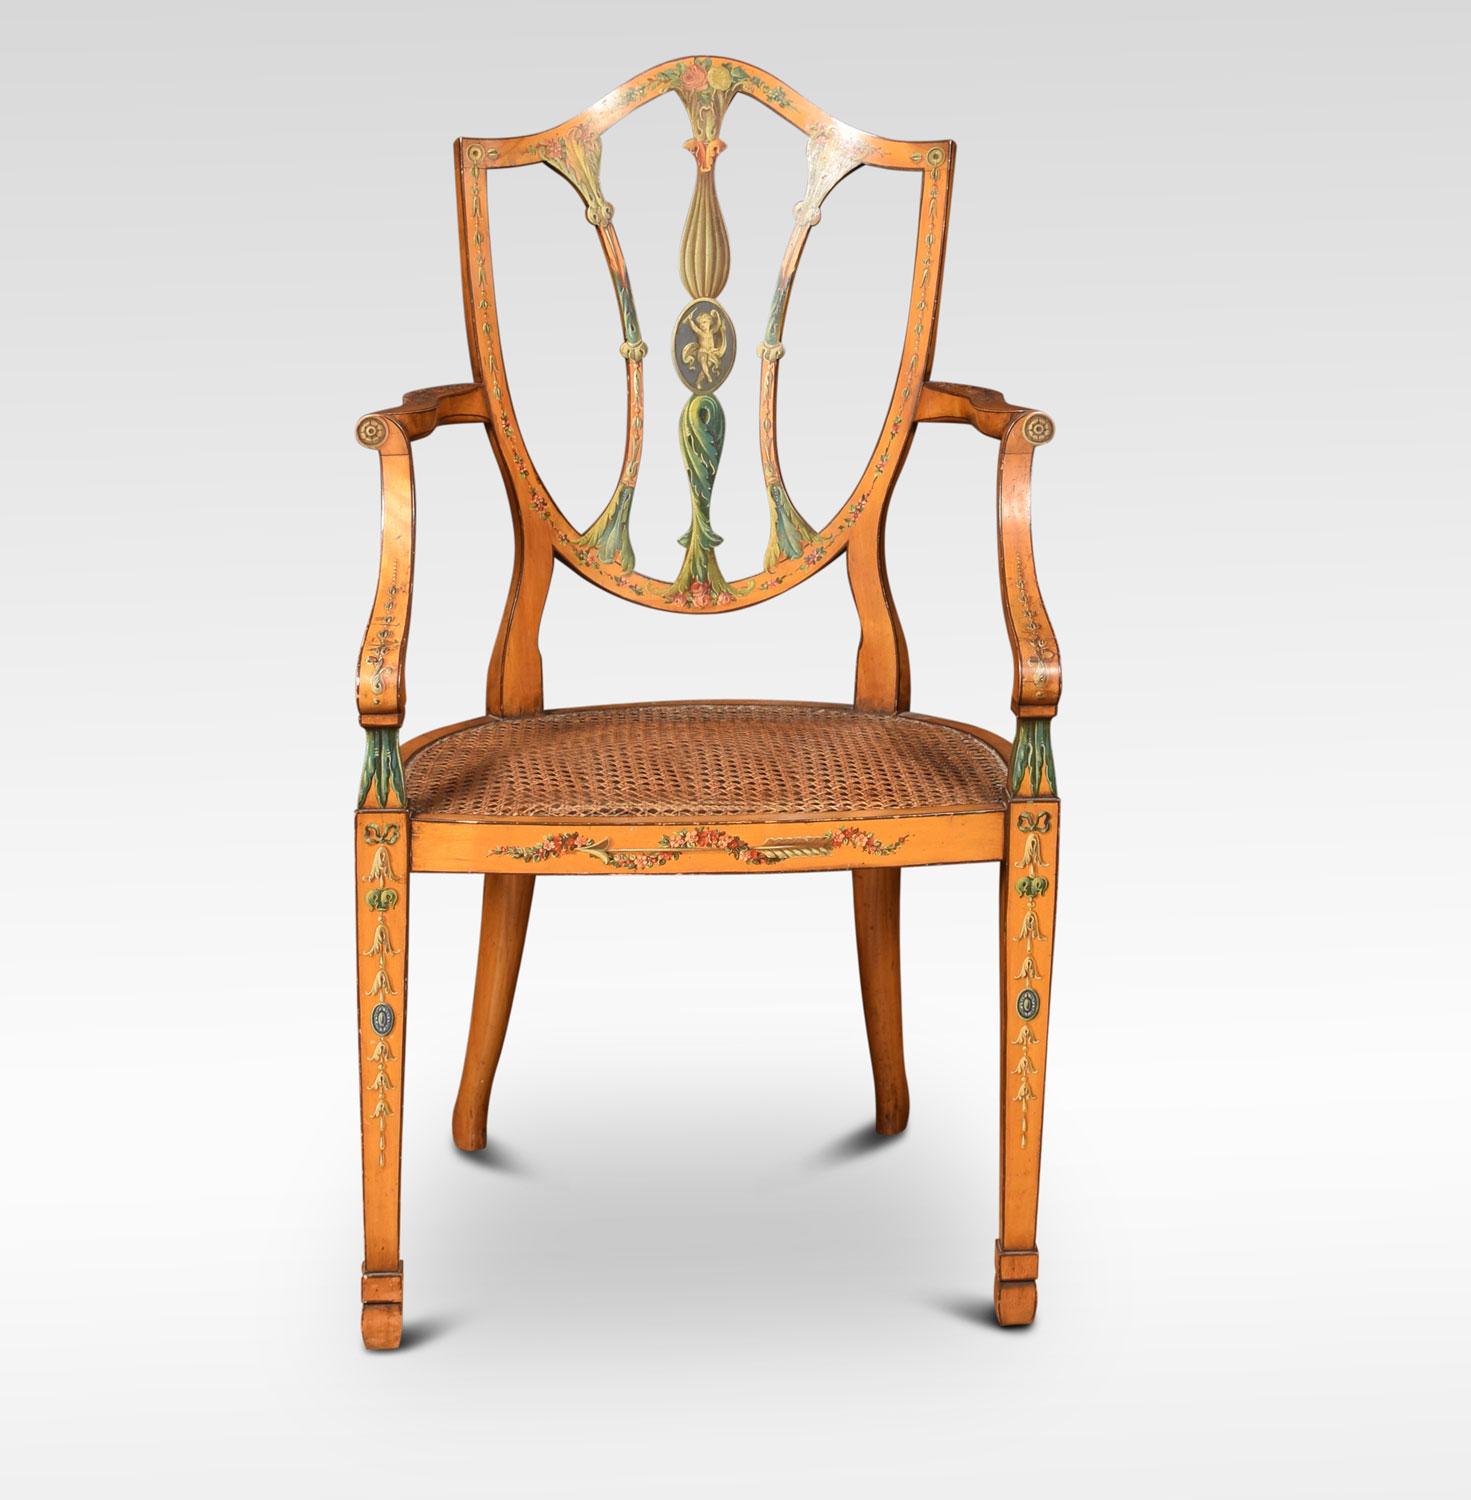 19th century Sheraton Revival satinwood elbow chair, painted overall with flowers and leaves, the shield shaped back with pierced splat and down swept arms, flanking the original inset bergere seat with removable cushion. All raised up on tapering